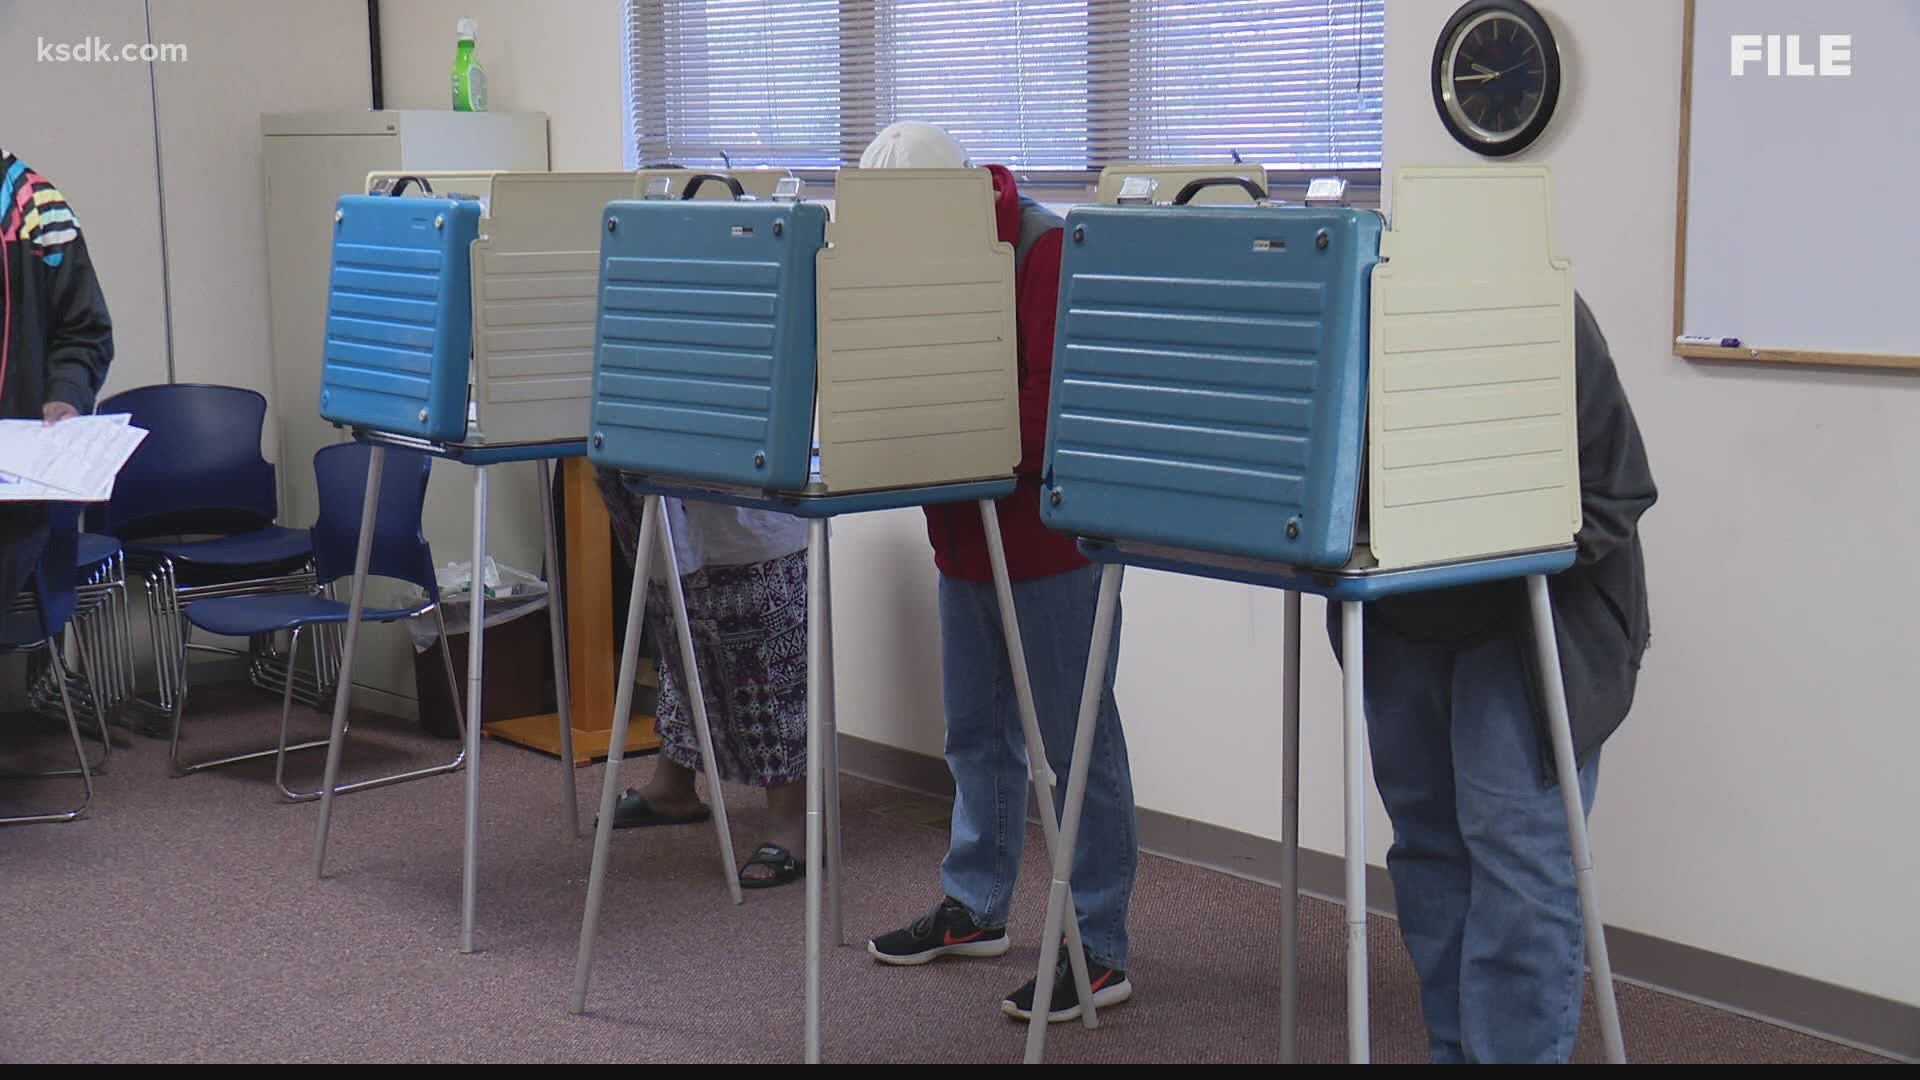 One of the bills lawmakers have sent to Gov. Parson would expand access to mail-in and absentee voting ballots in 2020 due to COVID-19